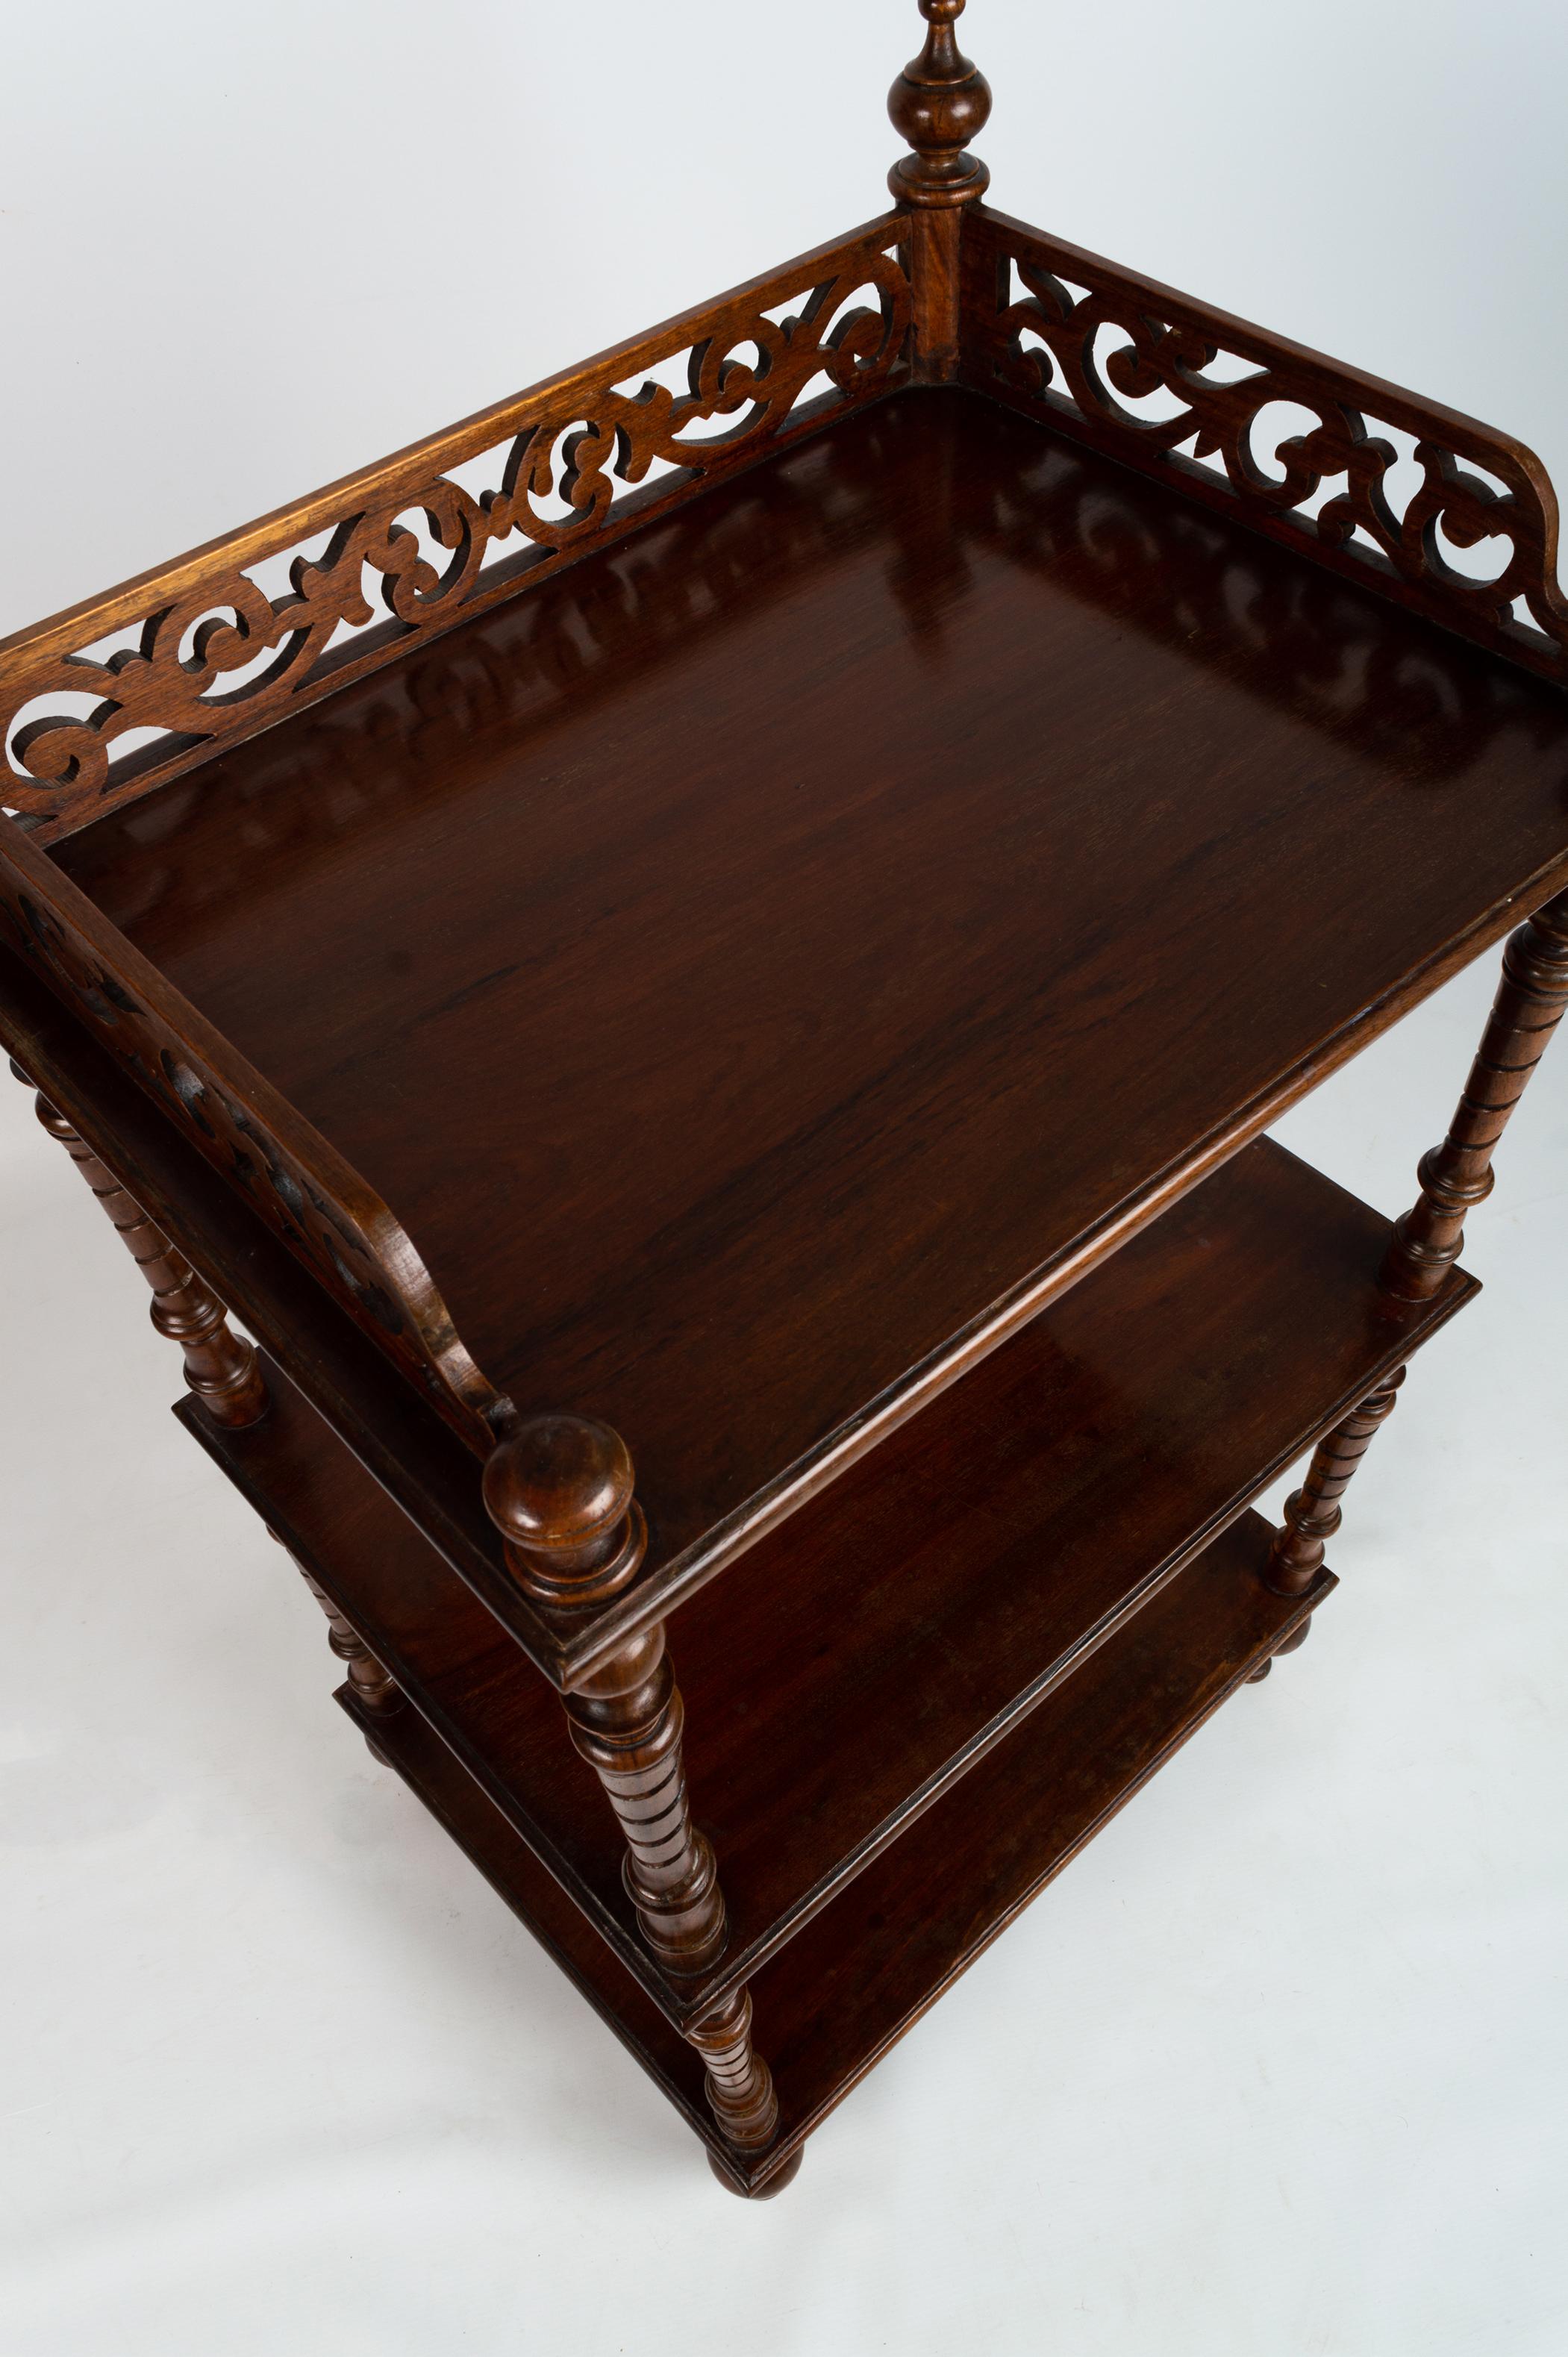 Antique English Victorian Carved Mahogany Whatnot Etagere Shelves C.1880 For Sale 4